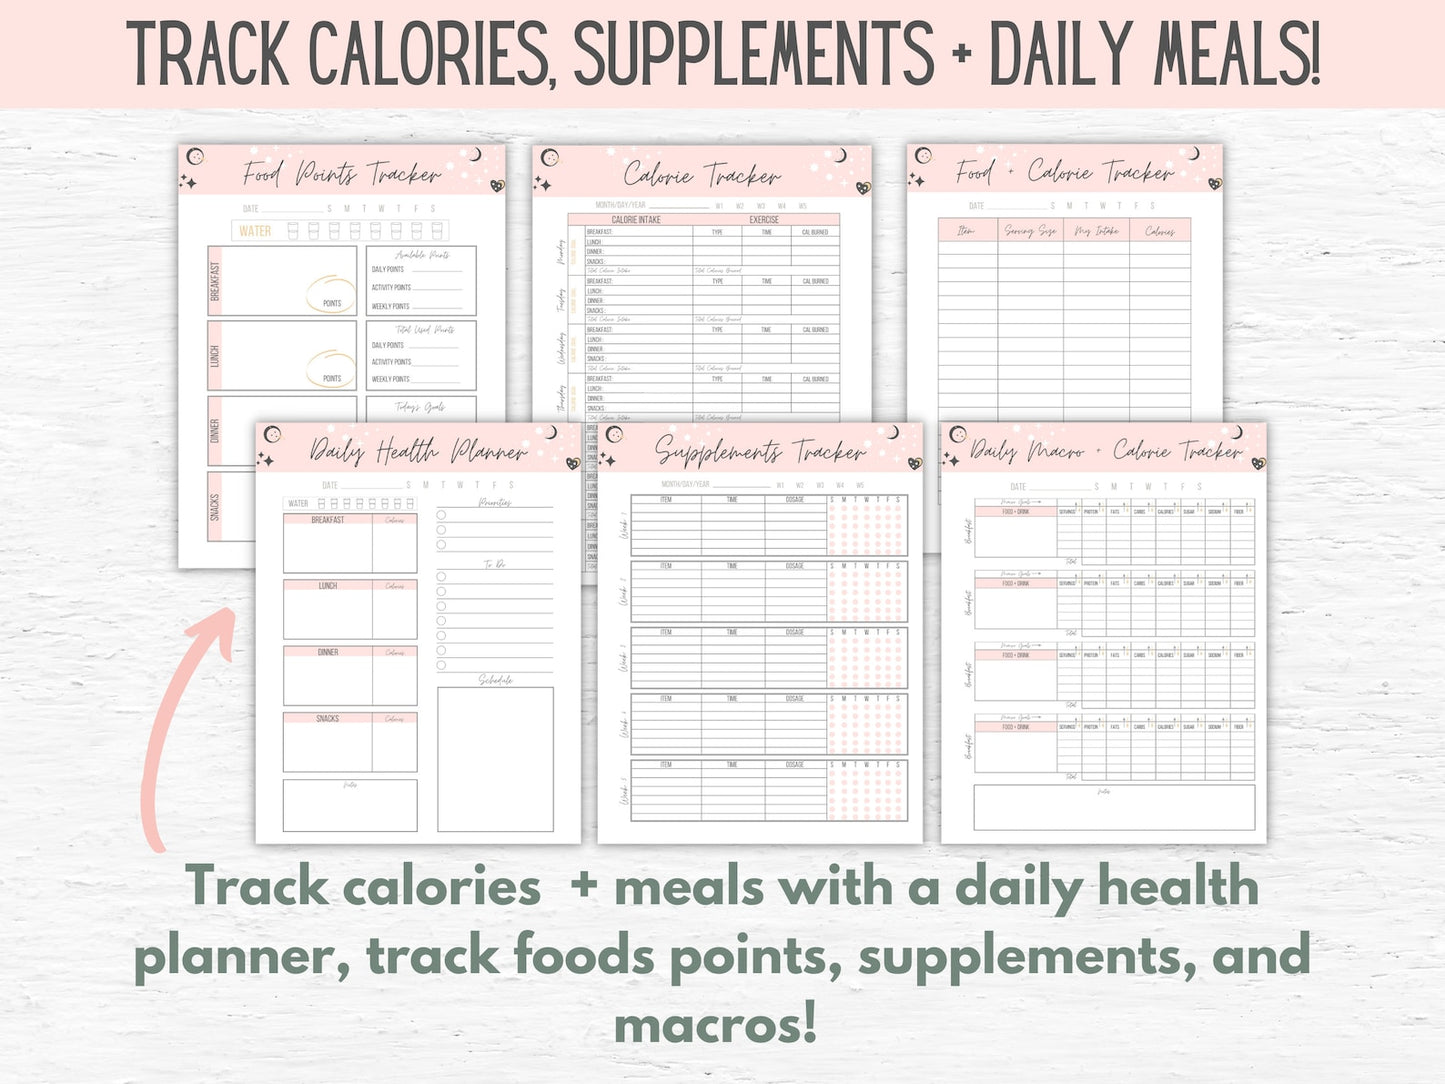 The Ultimate Pink Weight Loss Journal, Weight Loss Planner